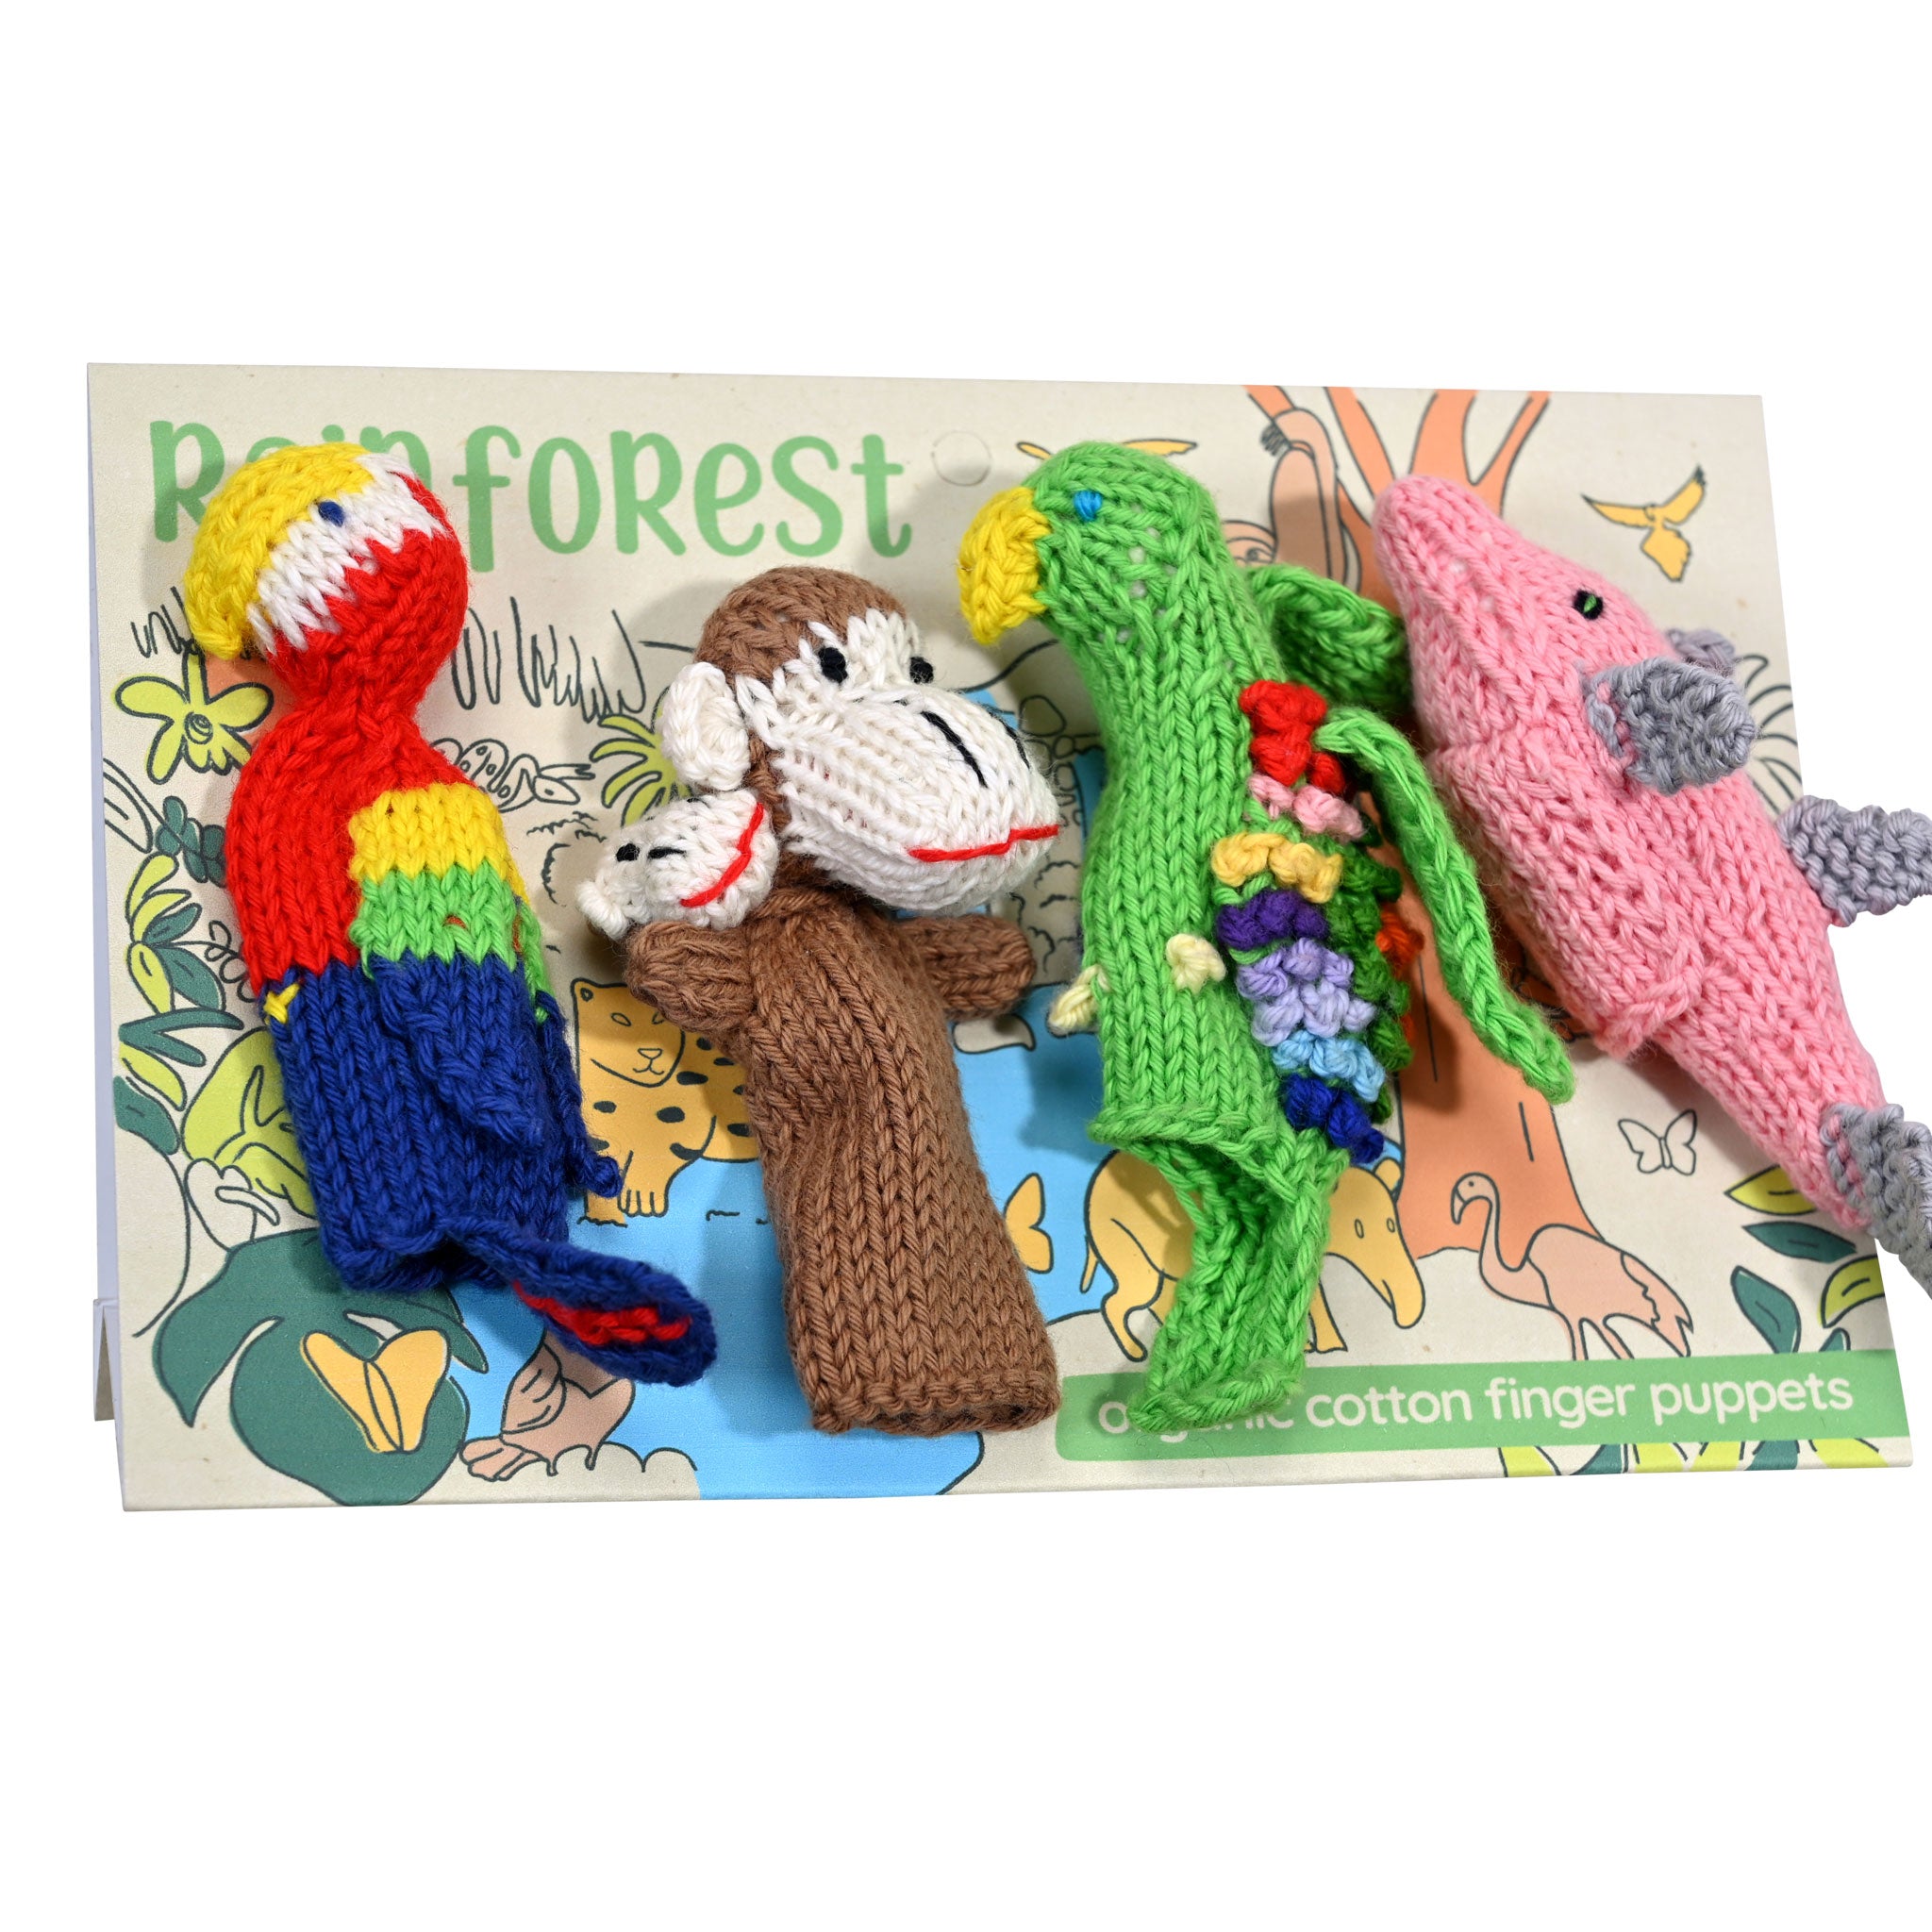 Dinosaur Puppets, Handmade Finger Puppets, Crocheted Dinosaur, Finger Toys,  Nursery Rhyme Finger Puppets, Baby Gifts, Toddler Toys 